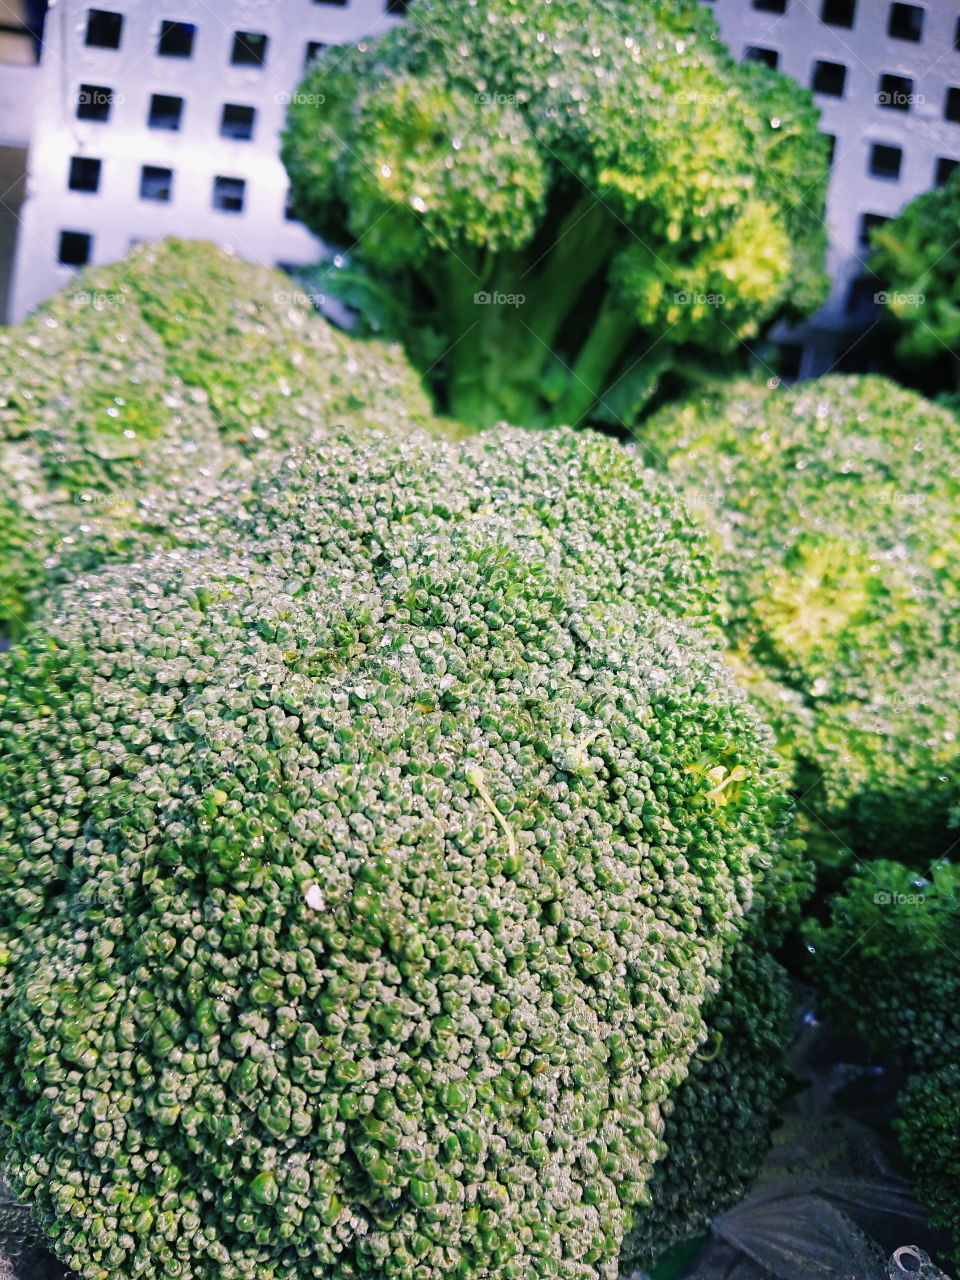 Broccoli with water spray.